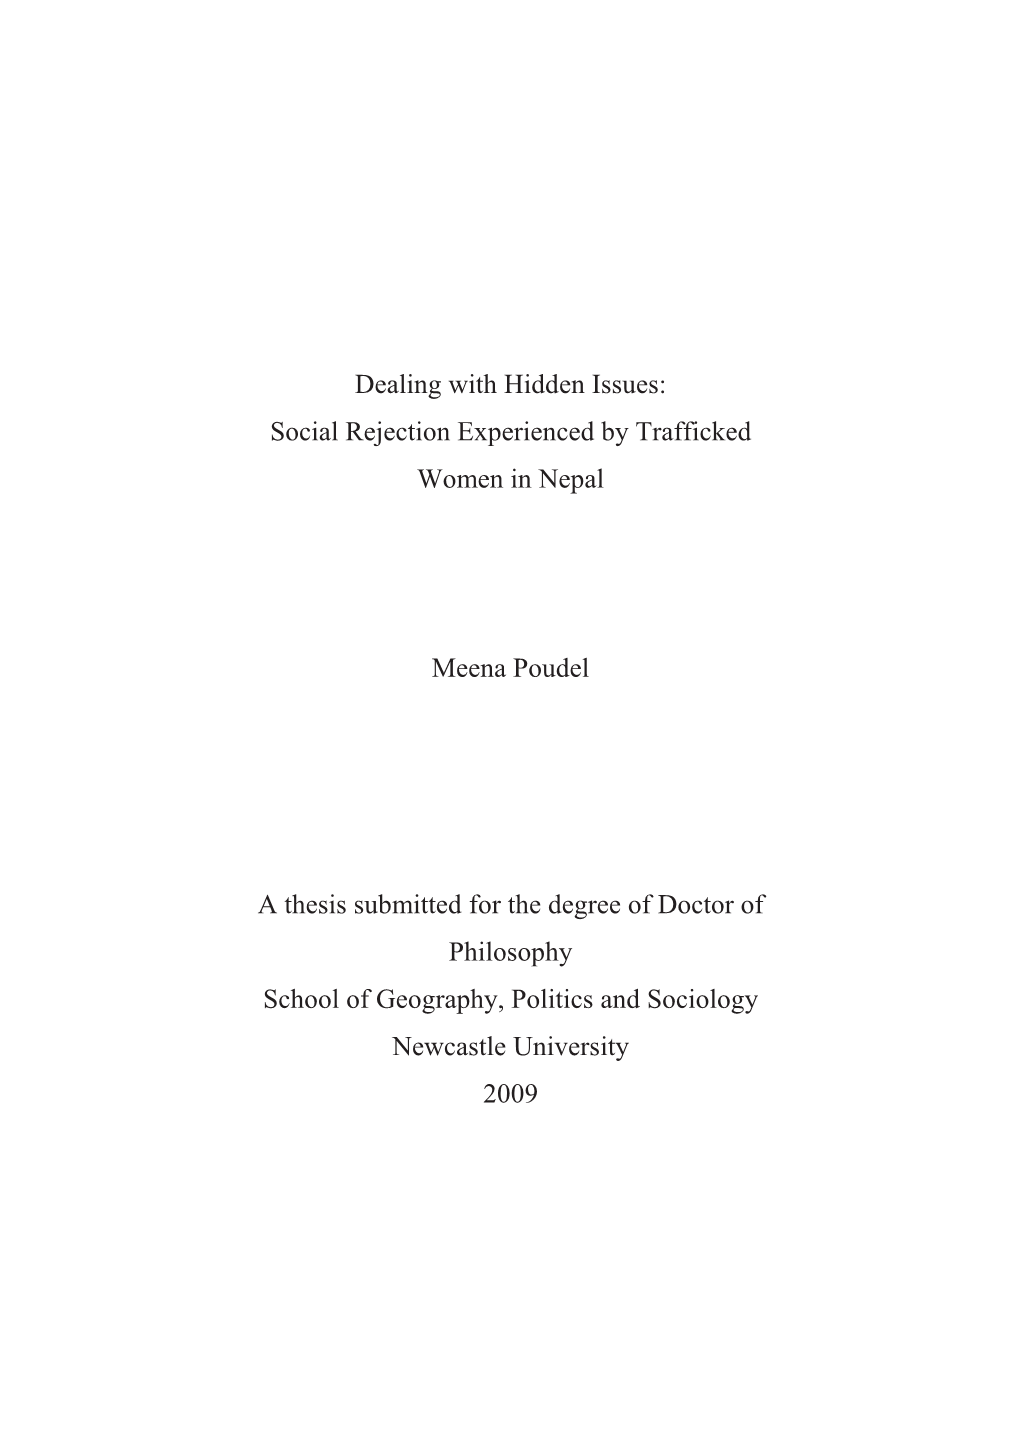 Dealing with Hidden Issues: Social Rejection Experienced by Trafficked Women in Nepal Meena Poudel a Thesis Submitted for the De